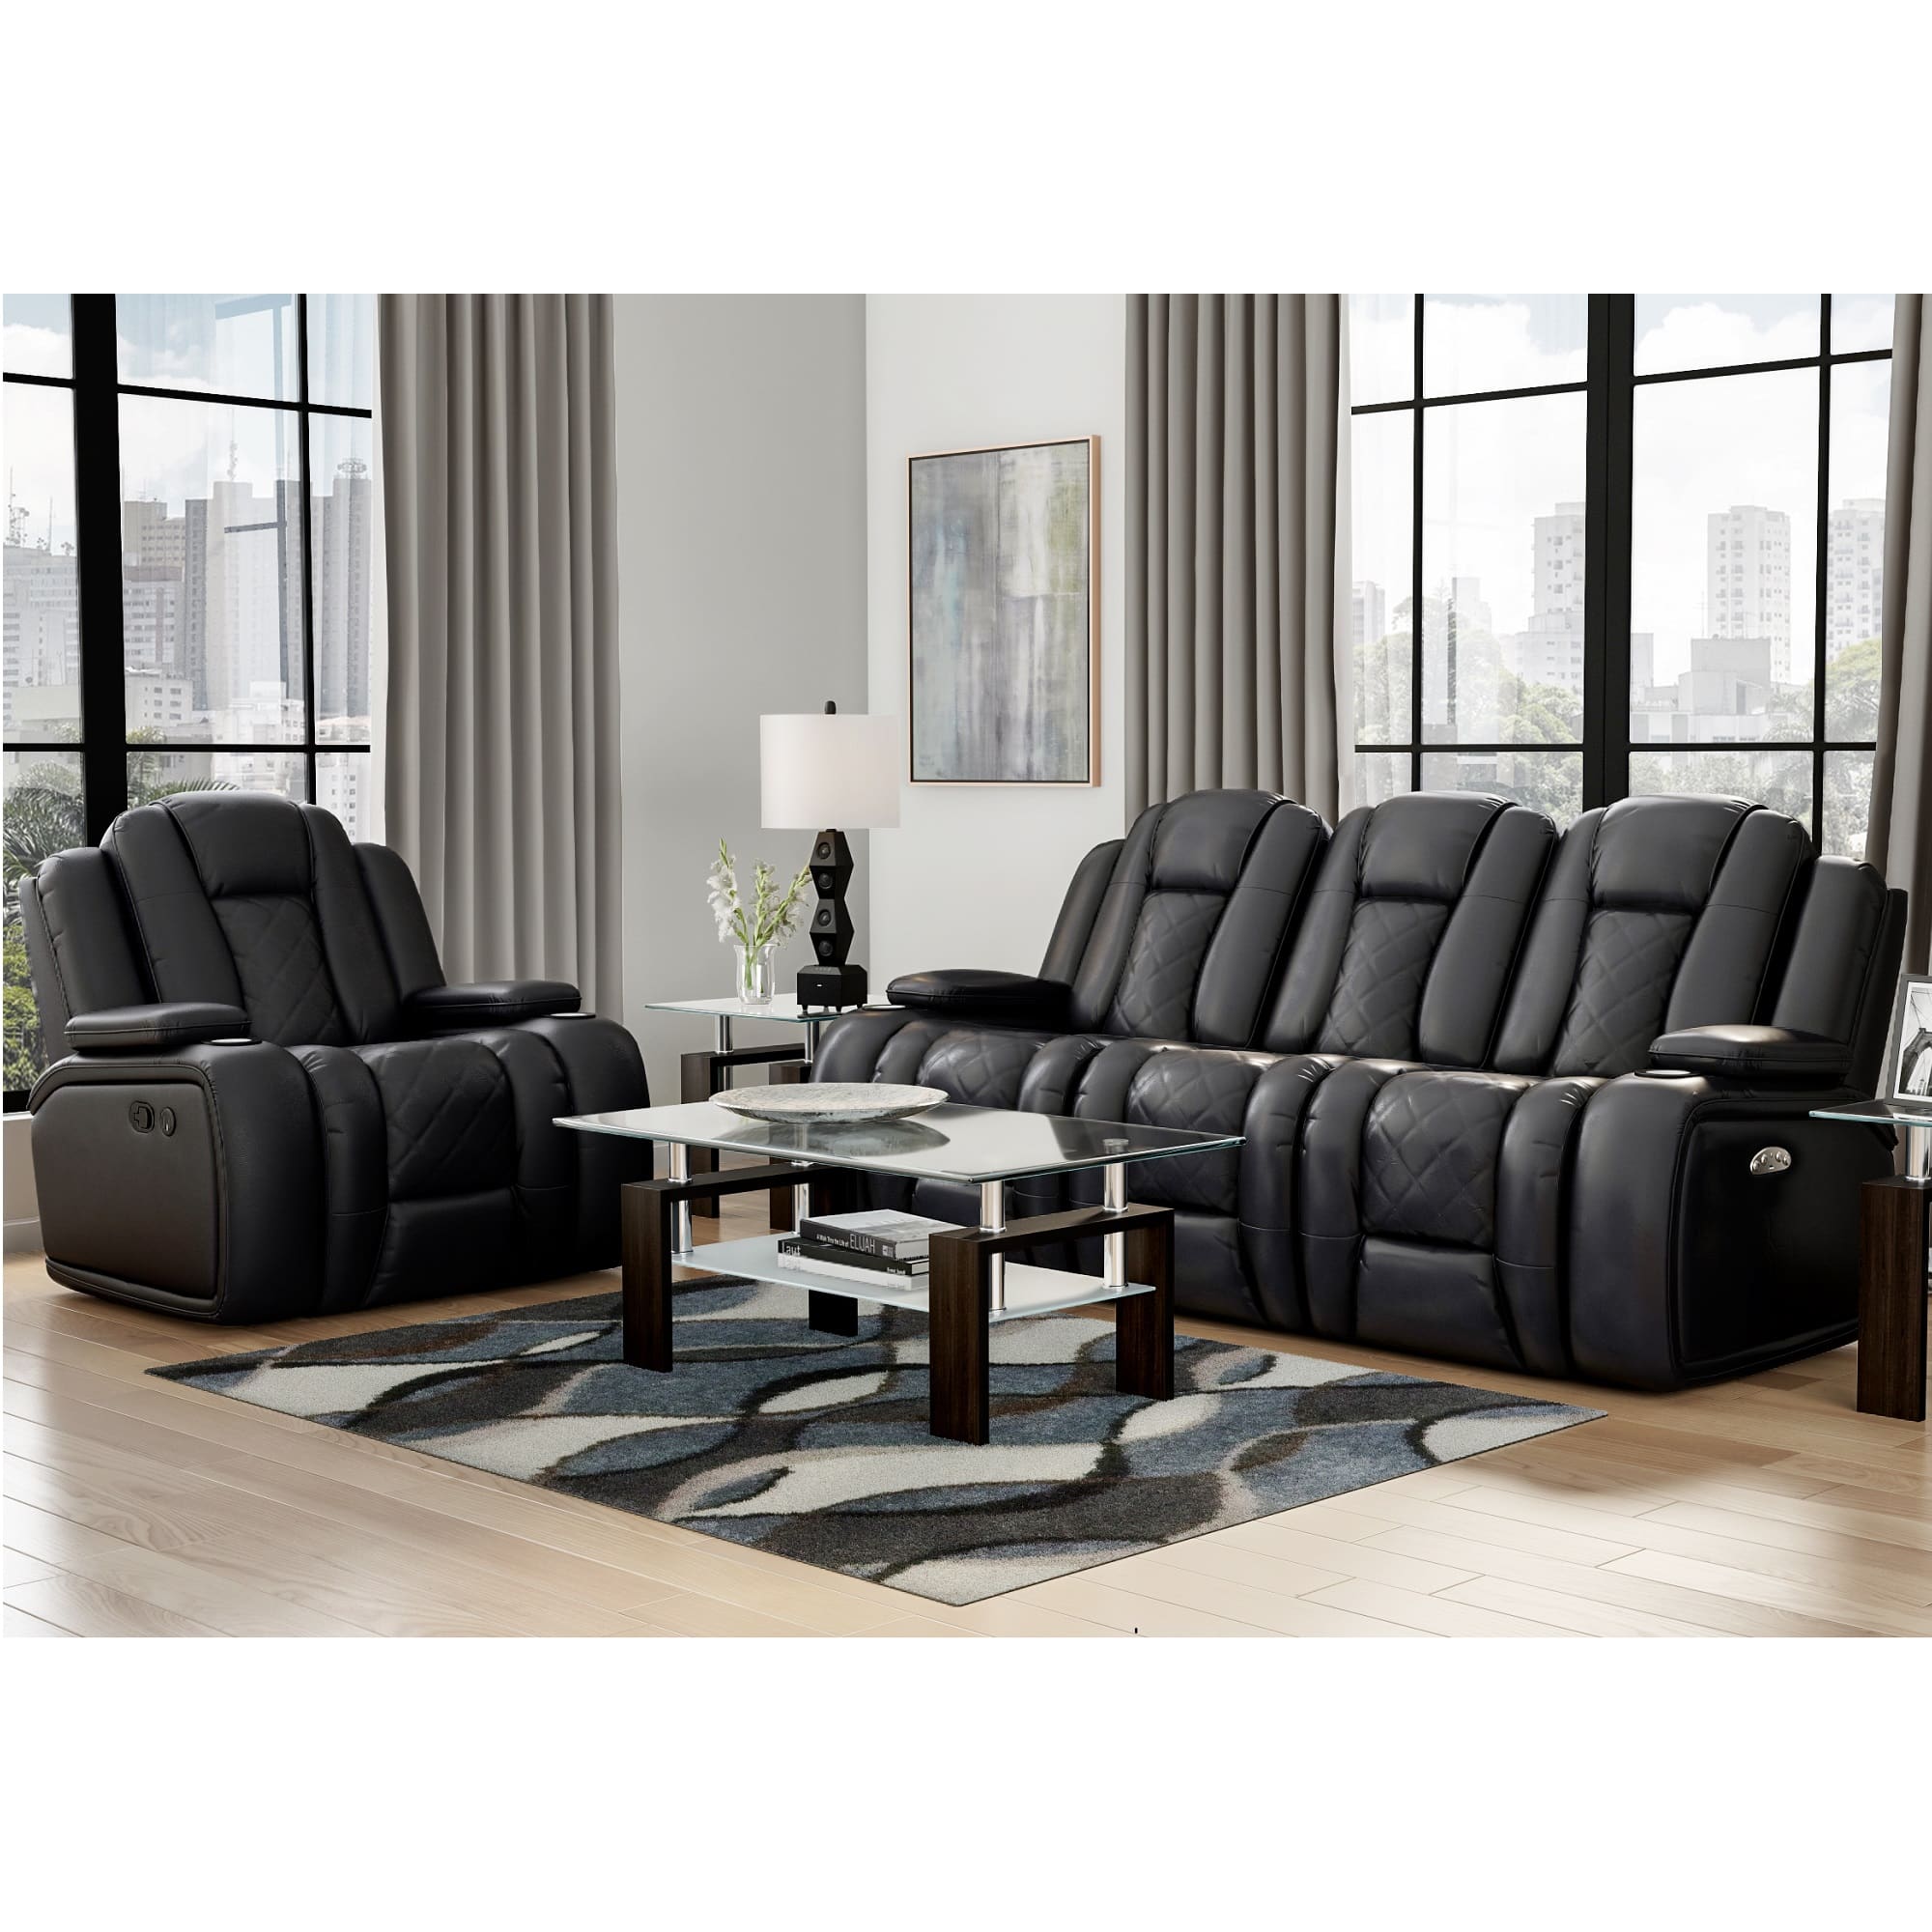 2piece transformer reclining living room collection